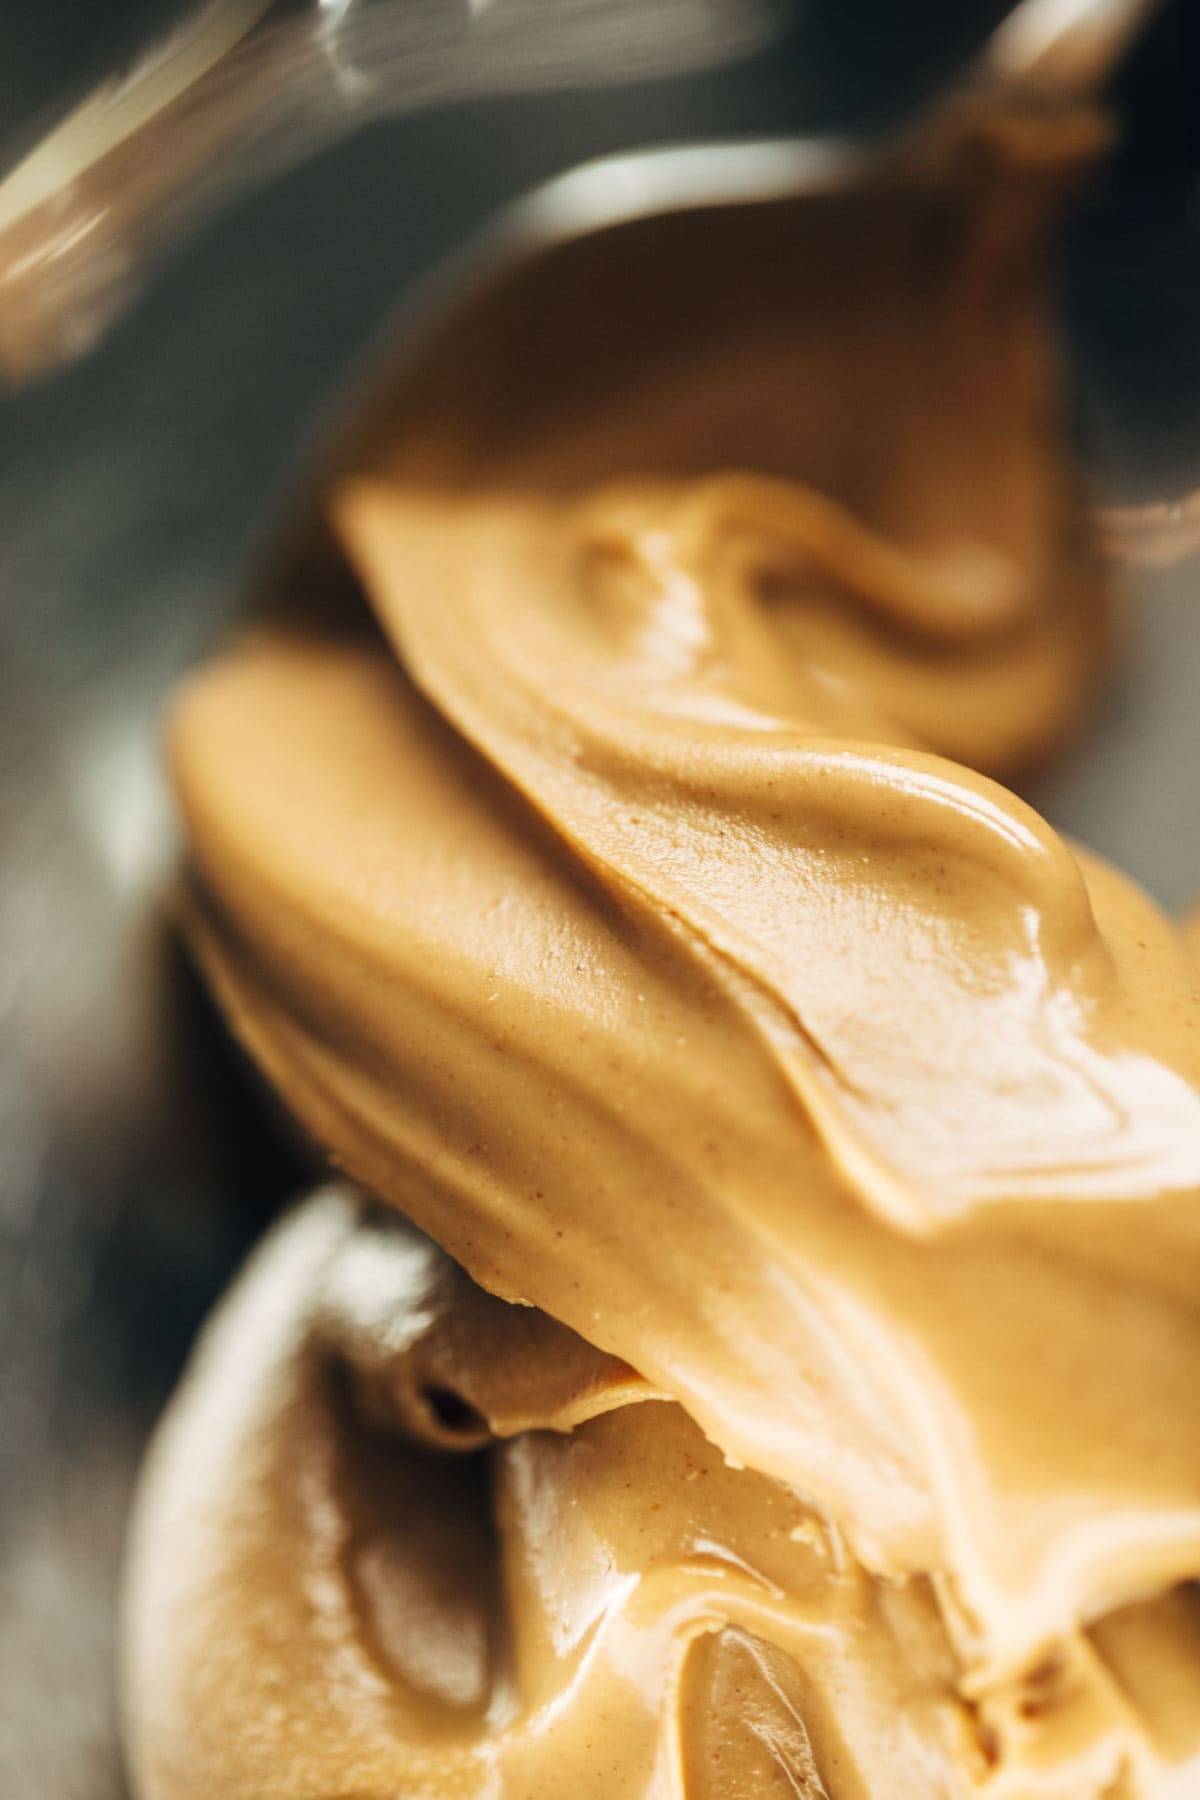 Creamy peanut butter with a spoon.